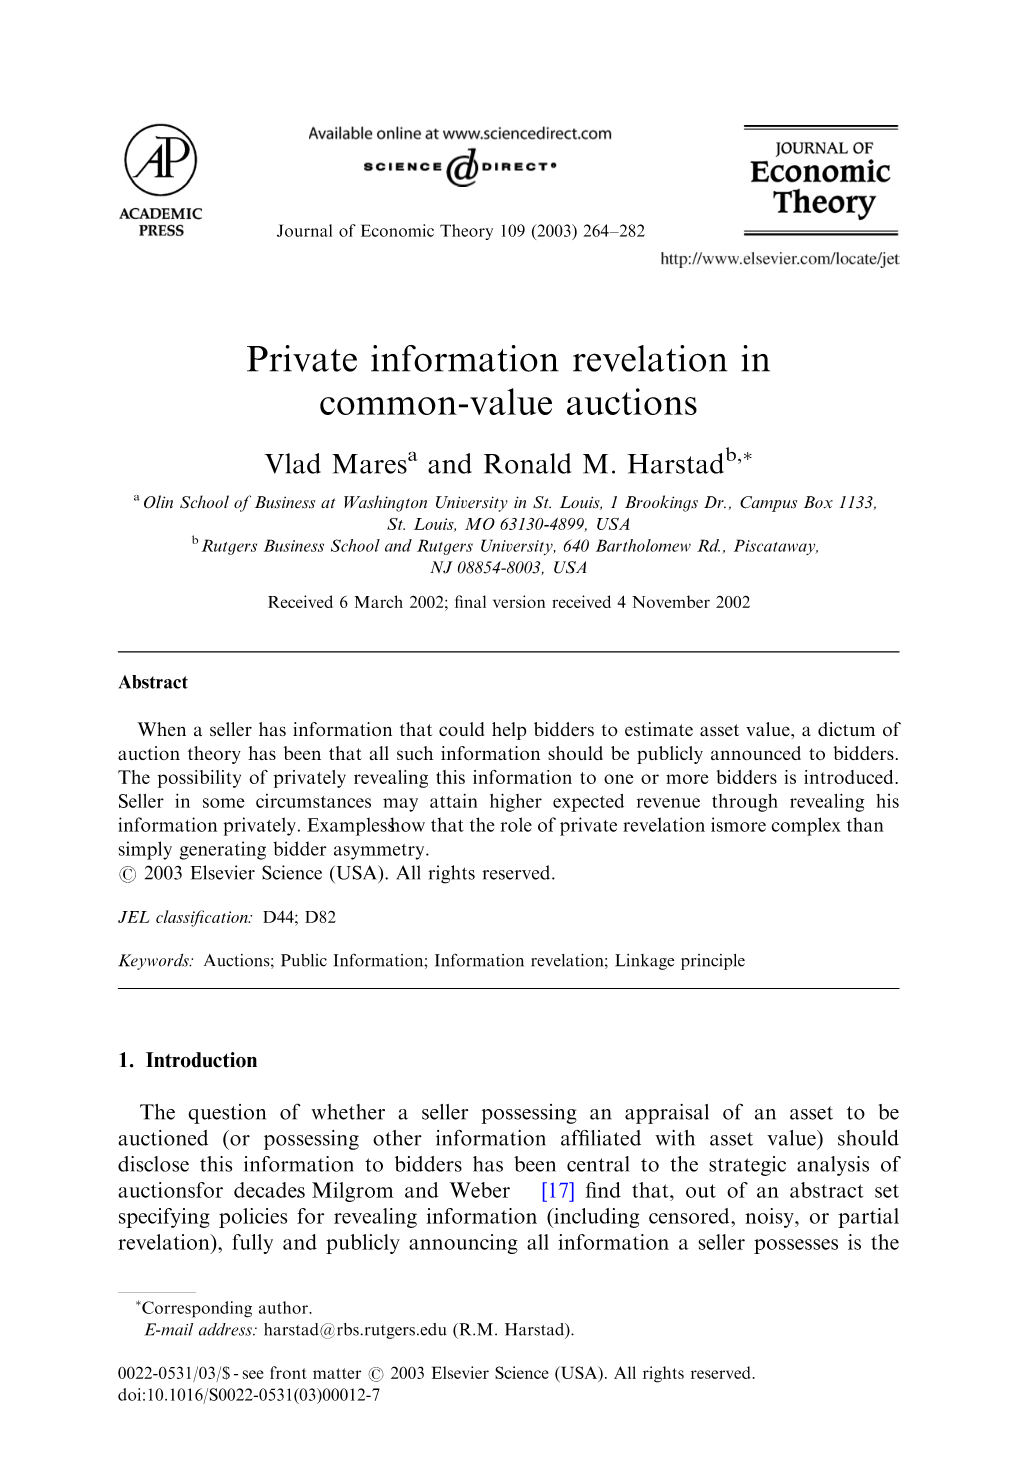 Private Information Revelation in Common-Value Auctions